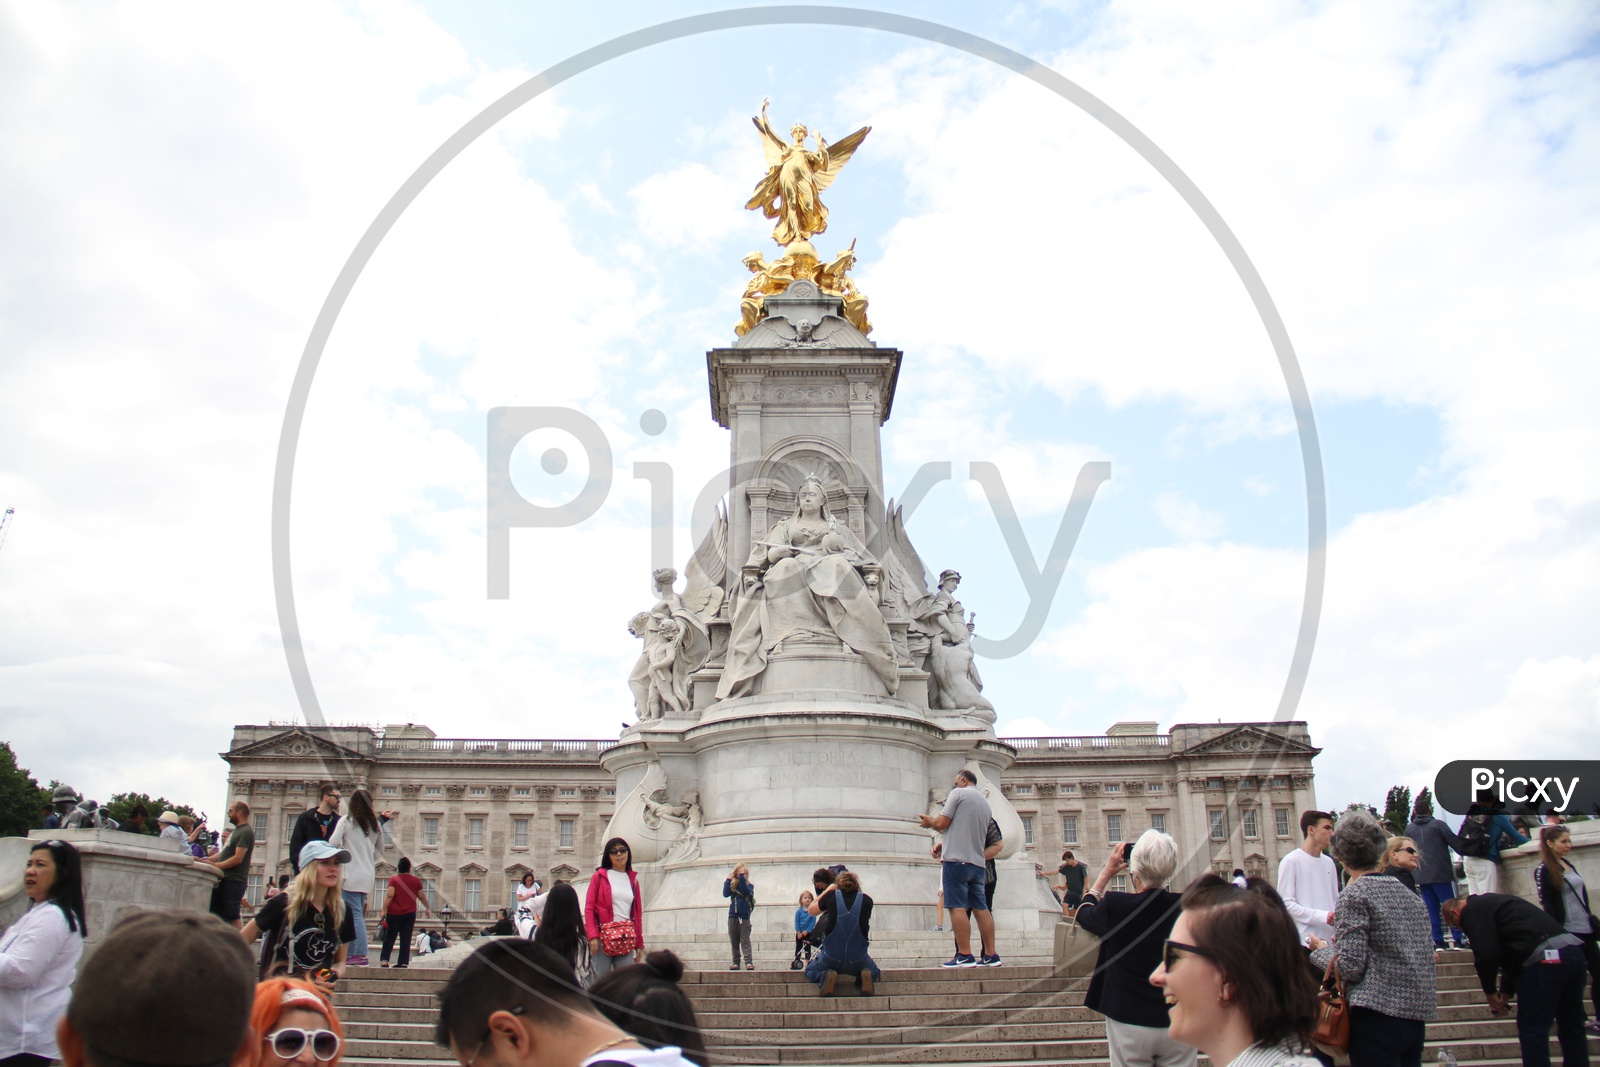 The Victoria Memorial at Buckingham Palace, London